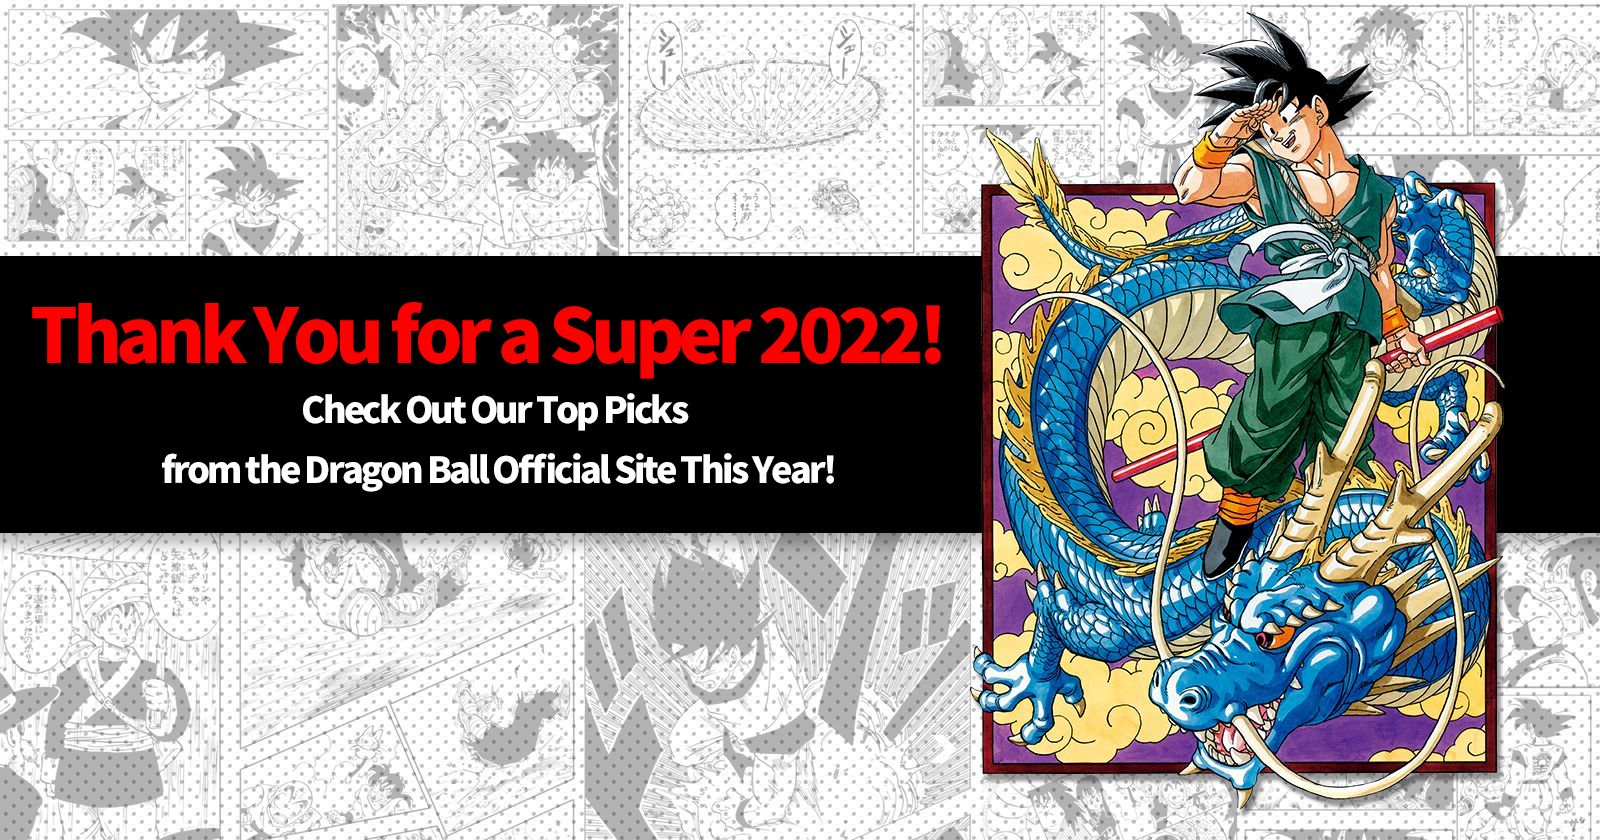 Thank You for a Super 2022! Check Out Our Top Picks from the Dragon Ball Official Site This Year!